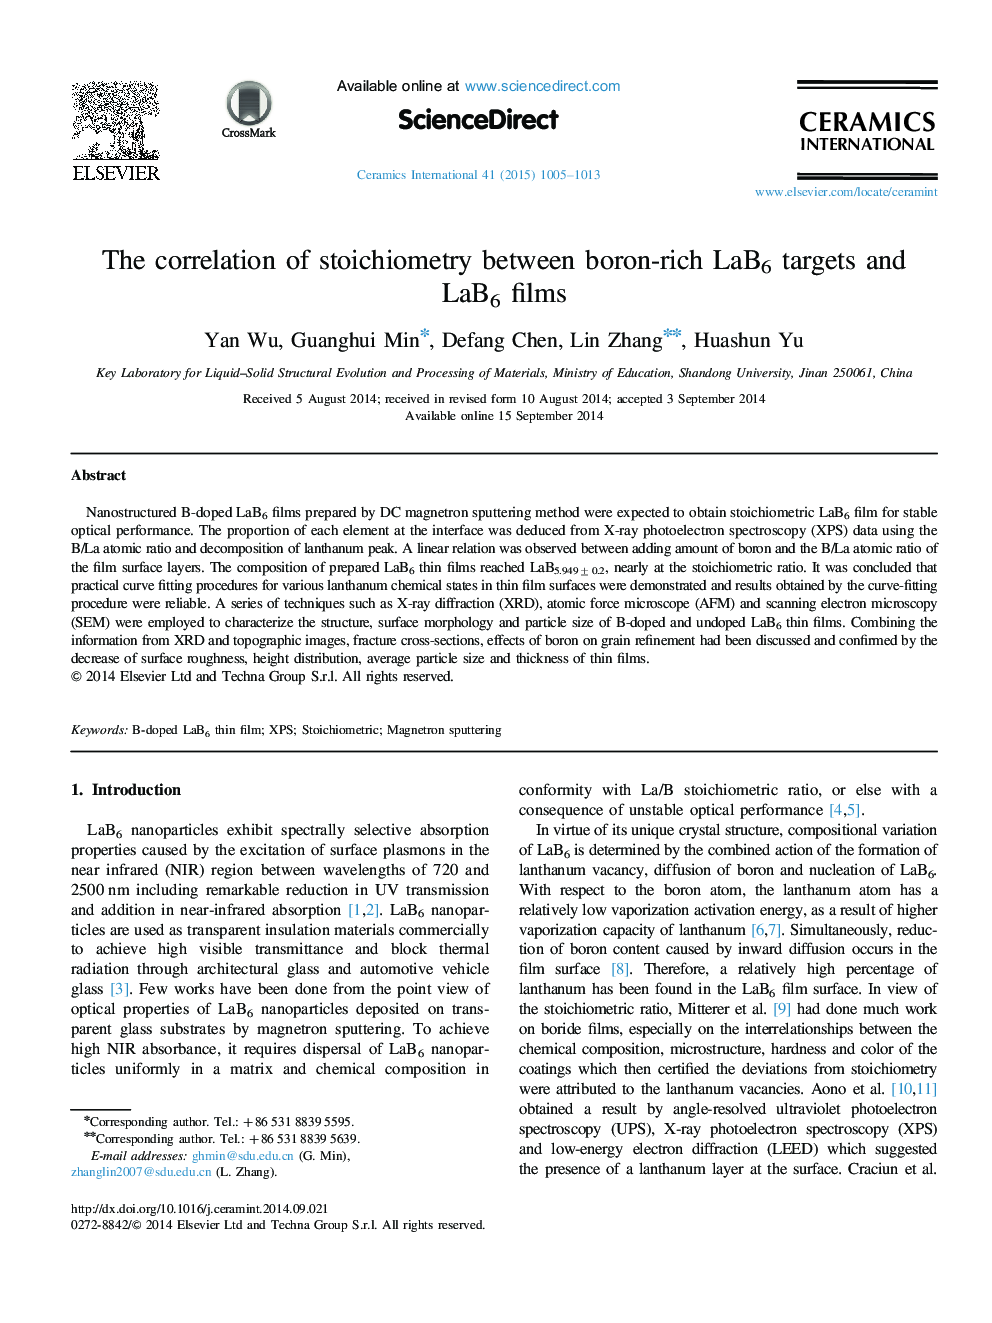 The correlation of stoichiometry between boron-rich LaB6 targets and LaB6 films